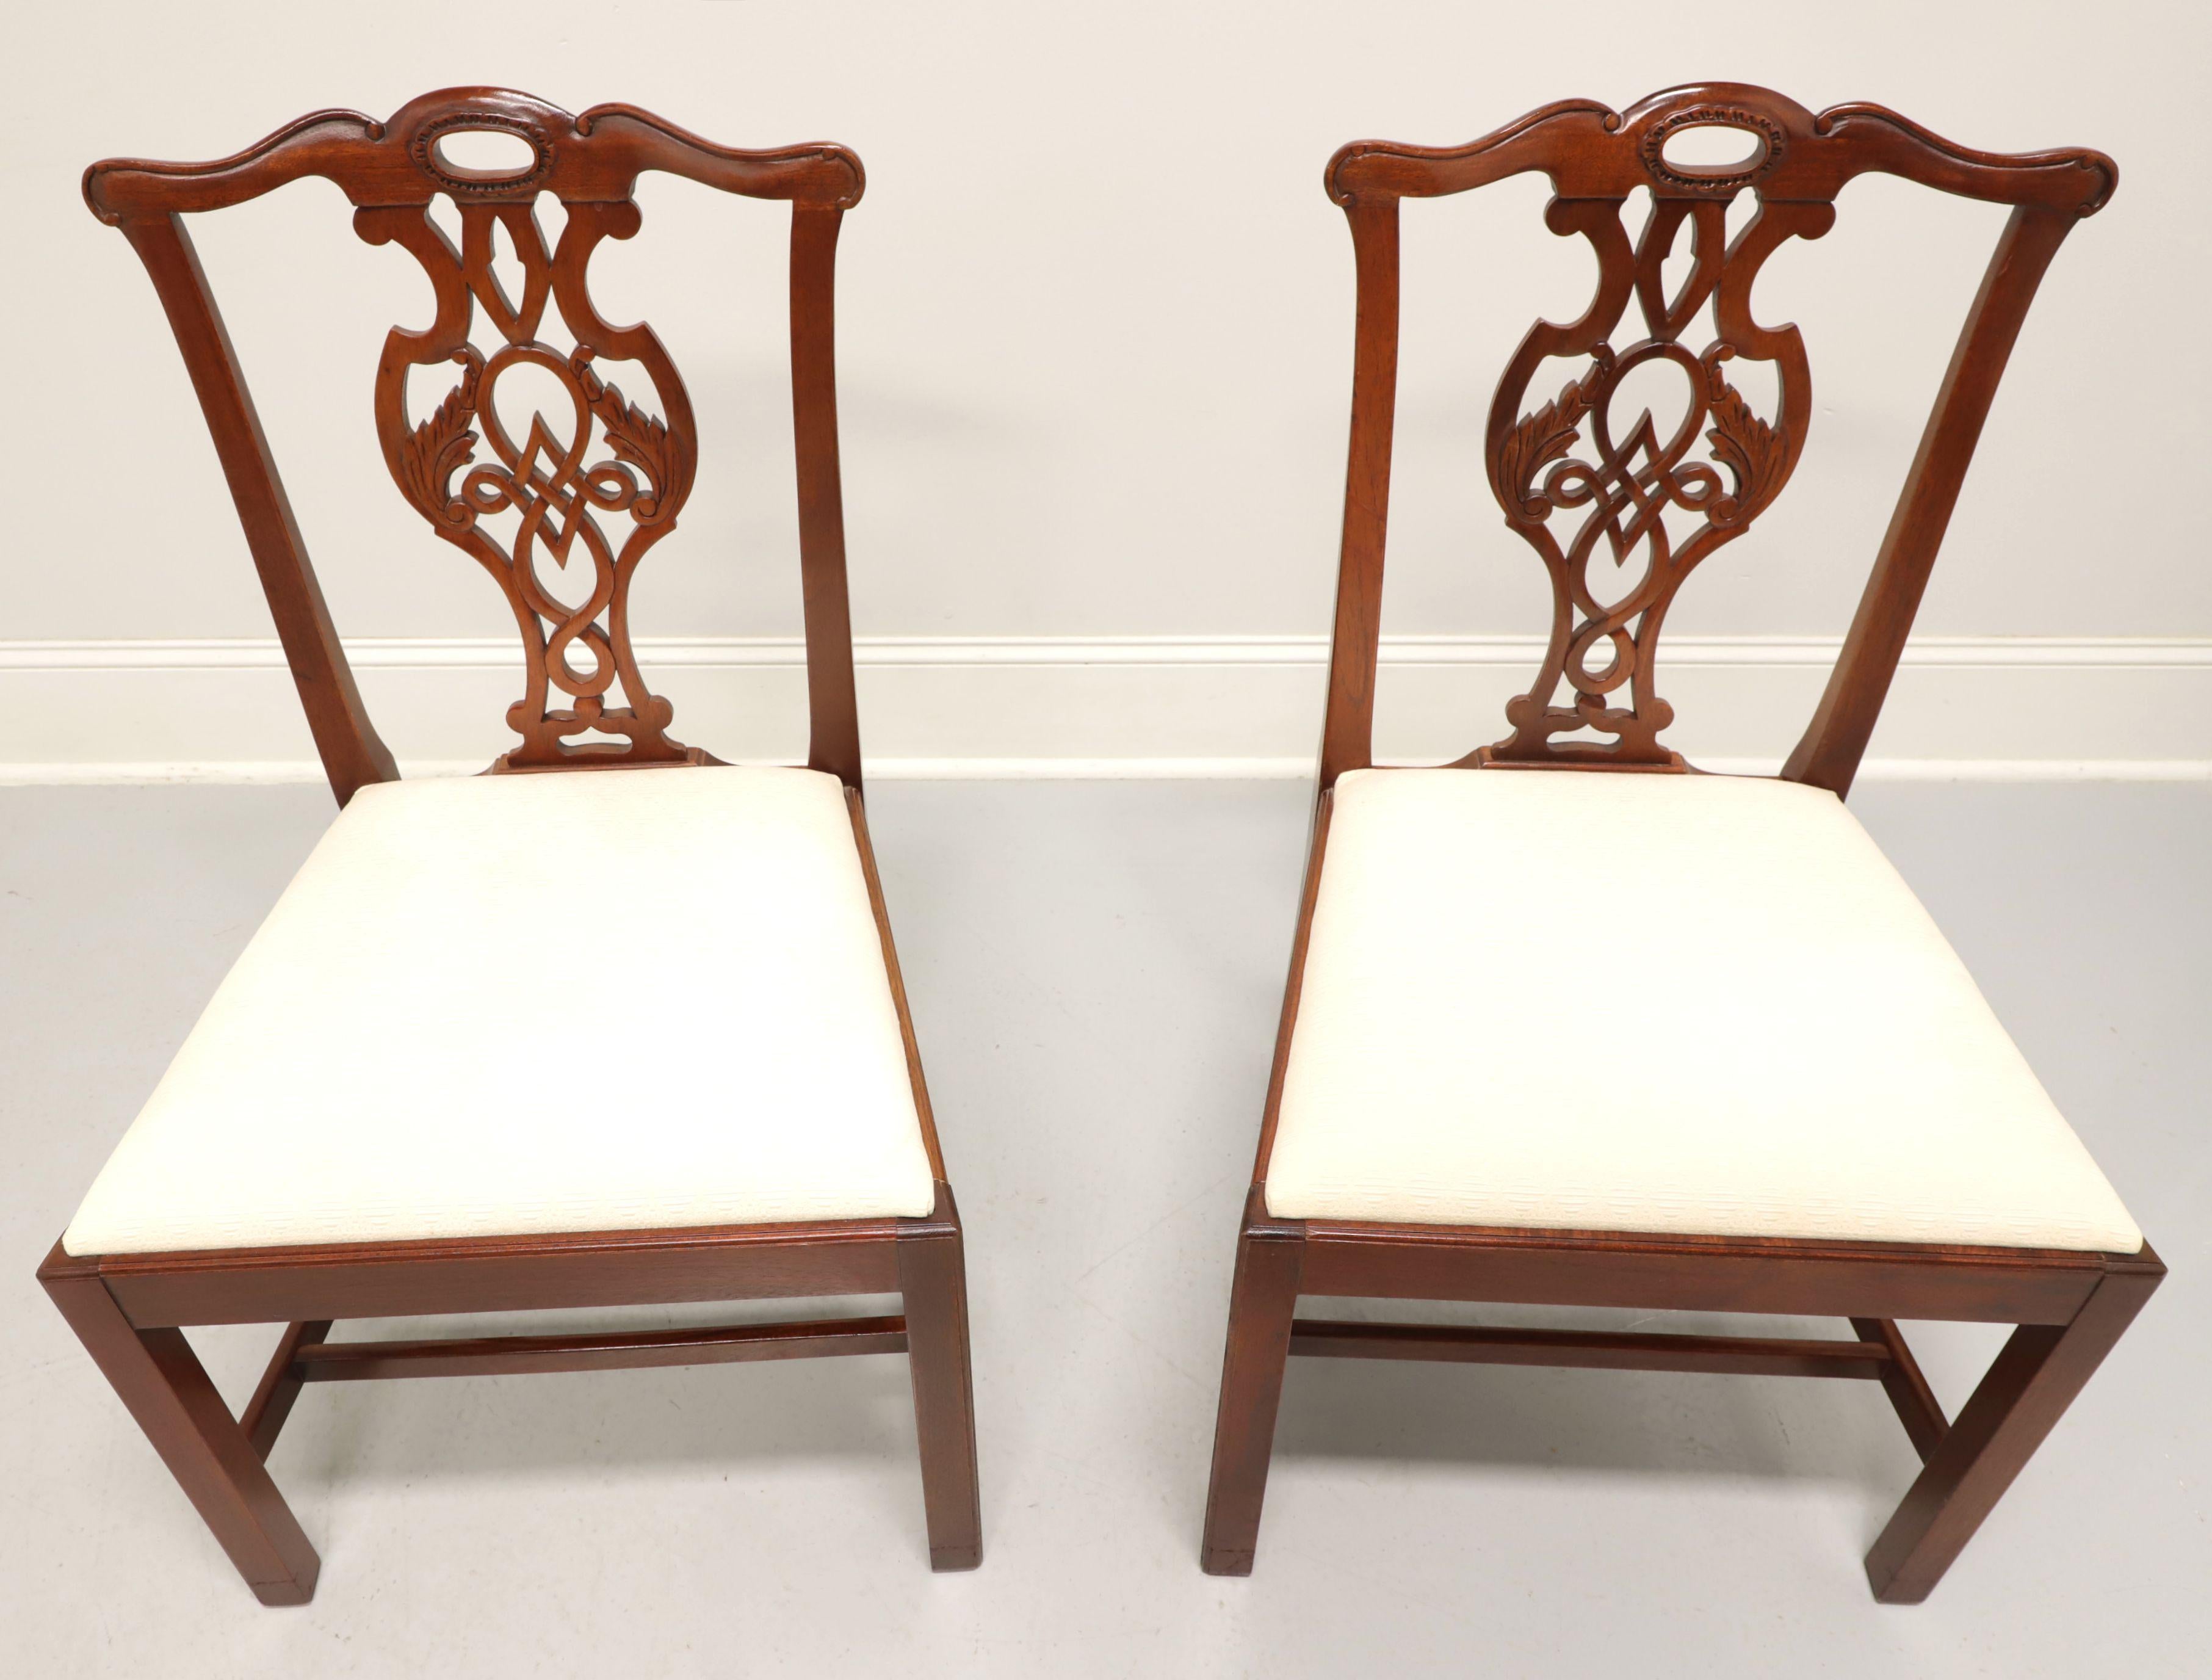 A pair of dining side chairs in the Chippendale style by Baker Furniture, from their Historic Charleston Collection. Solid mahogany with a lighter finish, carved crest rail, carved seat back, neutral cream color fabric upholstered seat, straight